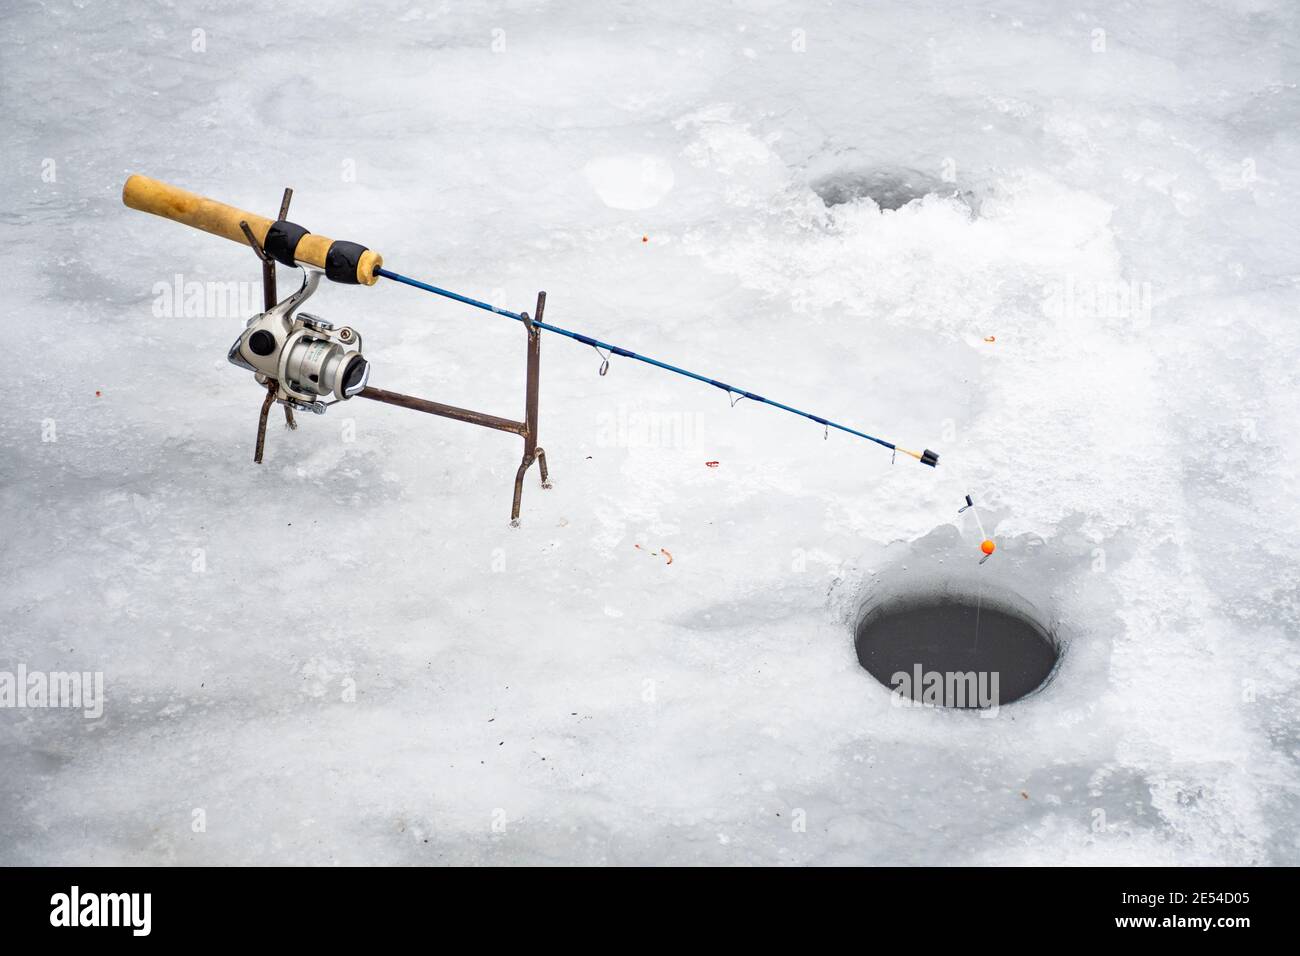 https://c8.alamy.com/comp/2E54D05/fishing-on-a-frozen-lake-in-winter-with-fishing-pole-or-rod-ice-auger-and-equipment-for-fishing-with-holes-in-the-ice-2E54D05.jpg